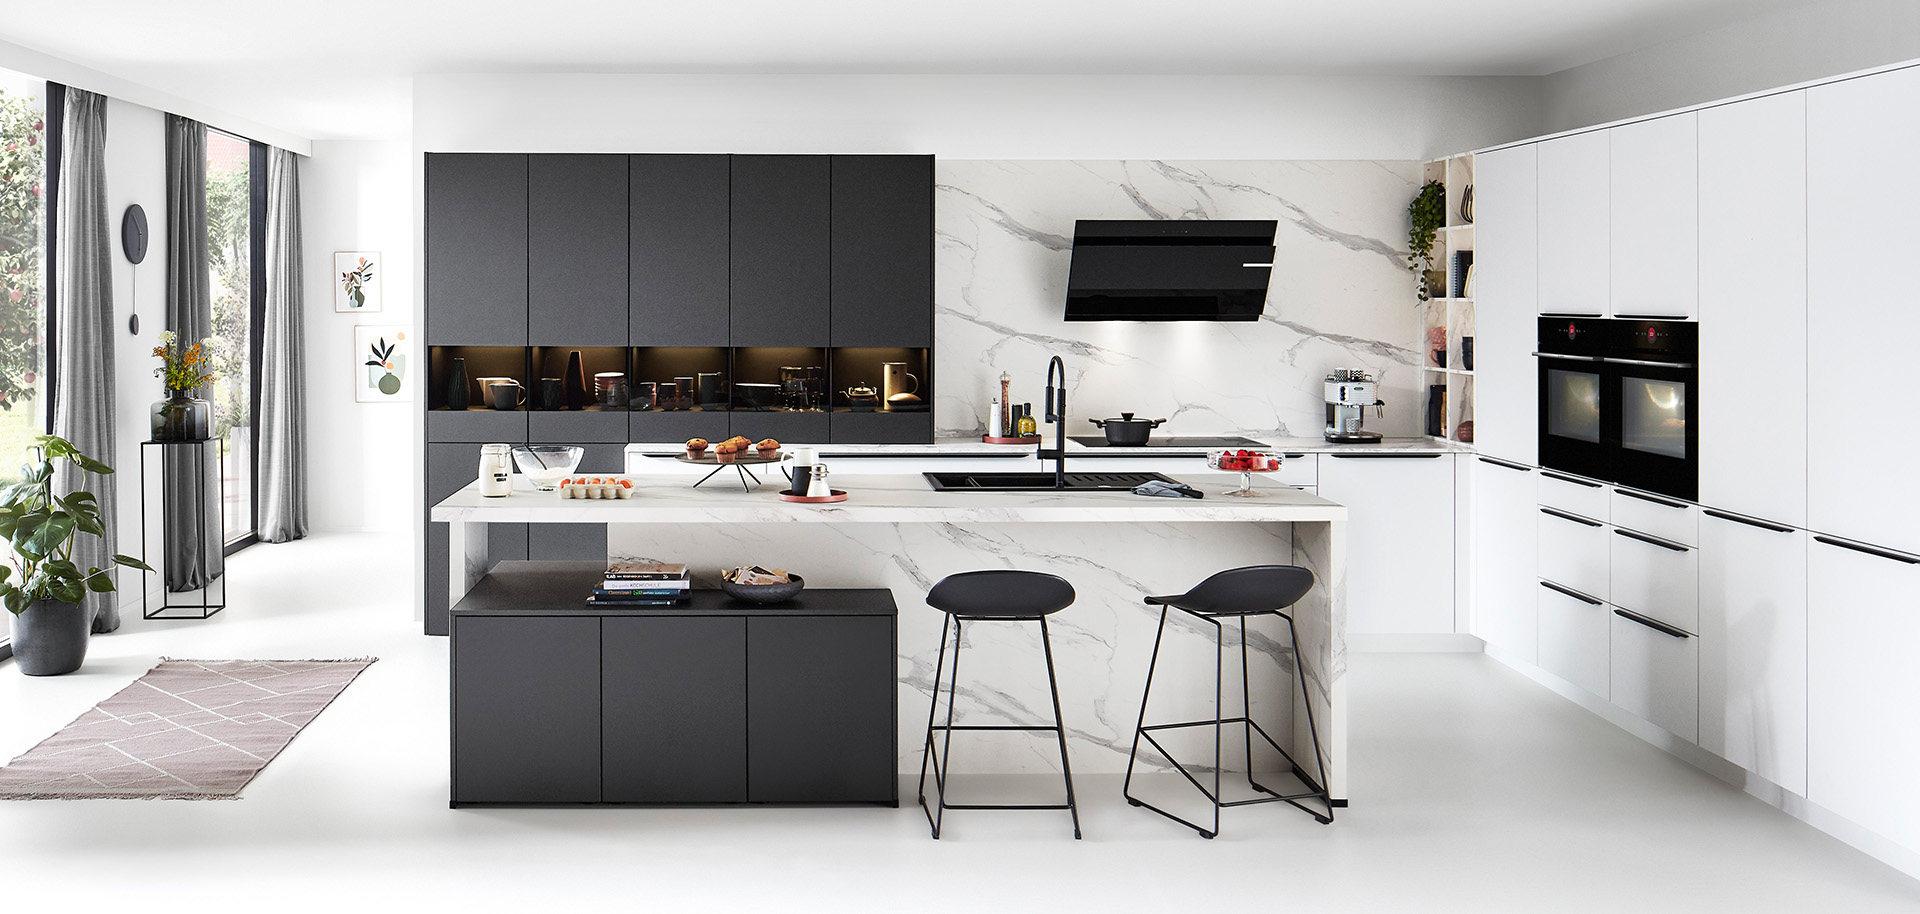 Modern kitchen with clean lines showcasing white cabinetry, black accents, marble backsplash, integrated appliances, and a central island with barstool seating.